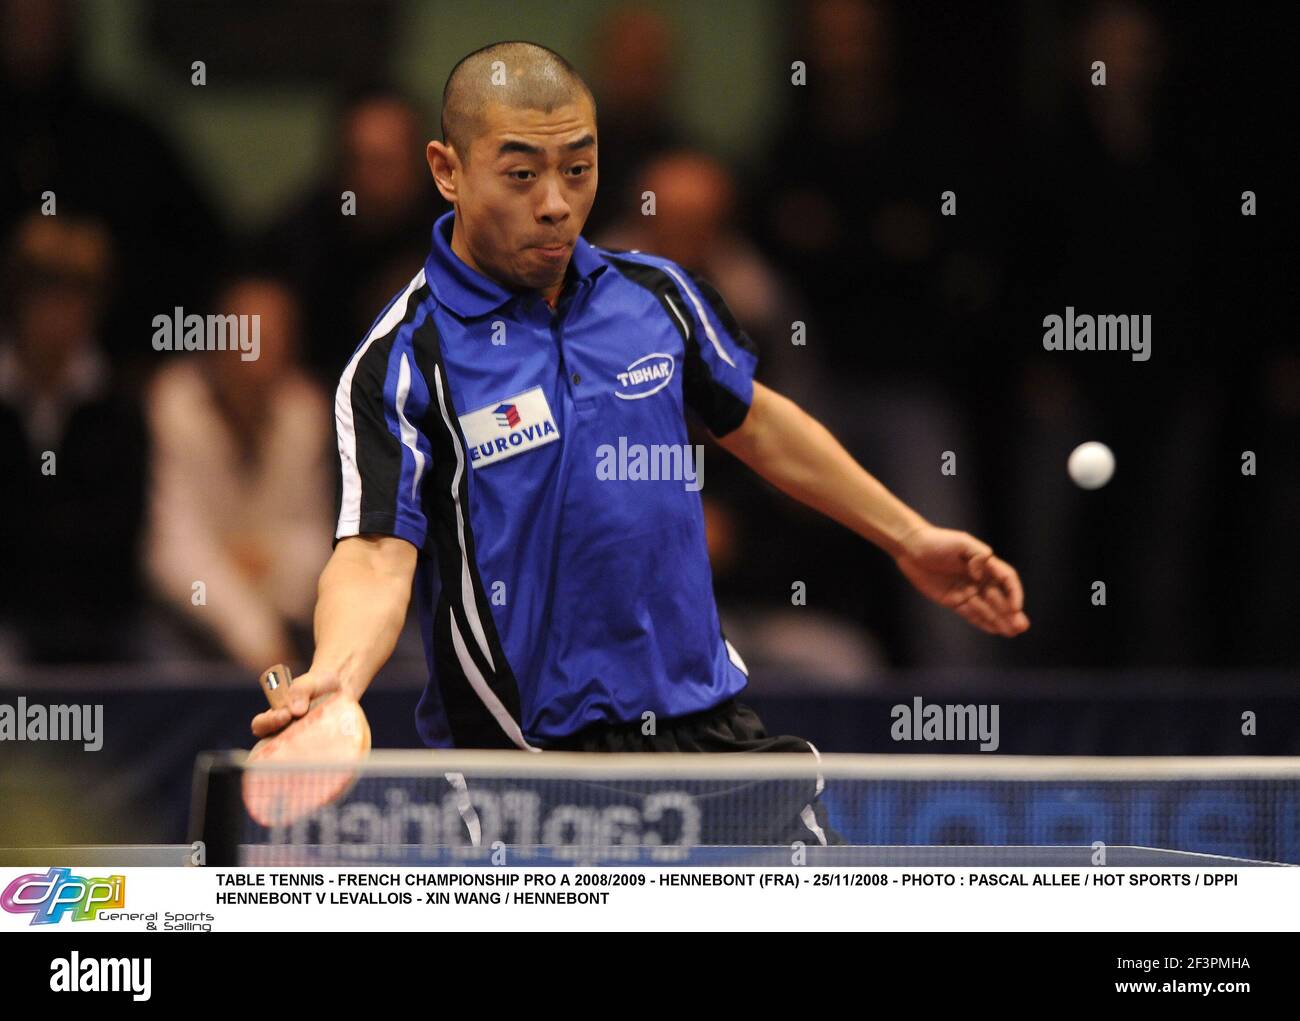 TABLE TENNIS - FRENCH CHAMPIONSHIP PRO A 2008/2009 - HENNEBONT (FRA) -  25/11/2008 - PHOTO : PASCAL ALLEE / HOT SPORTS / DPPI HENNEBONT V LEVALLOIS  - XIN WANG / HENNEBONT Stock Photo - Alamy